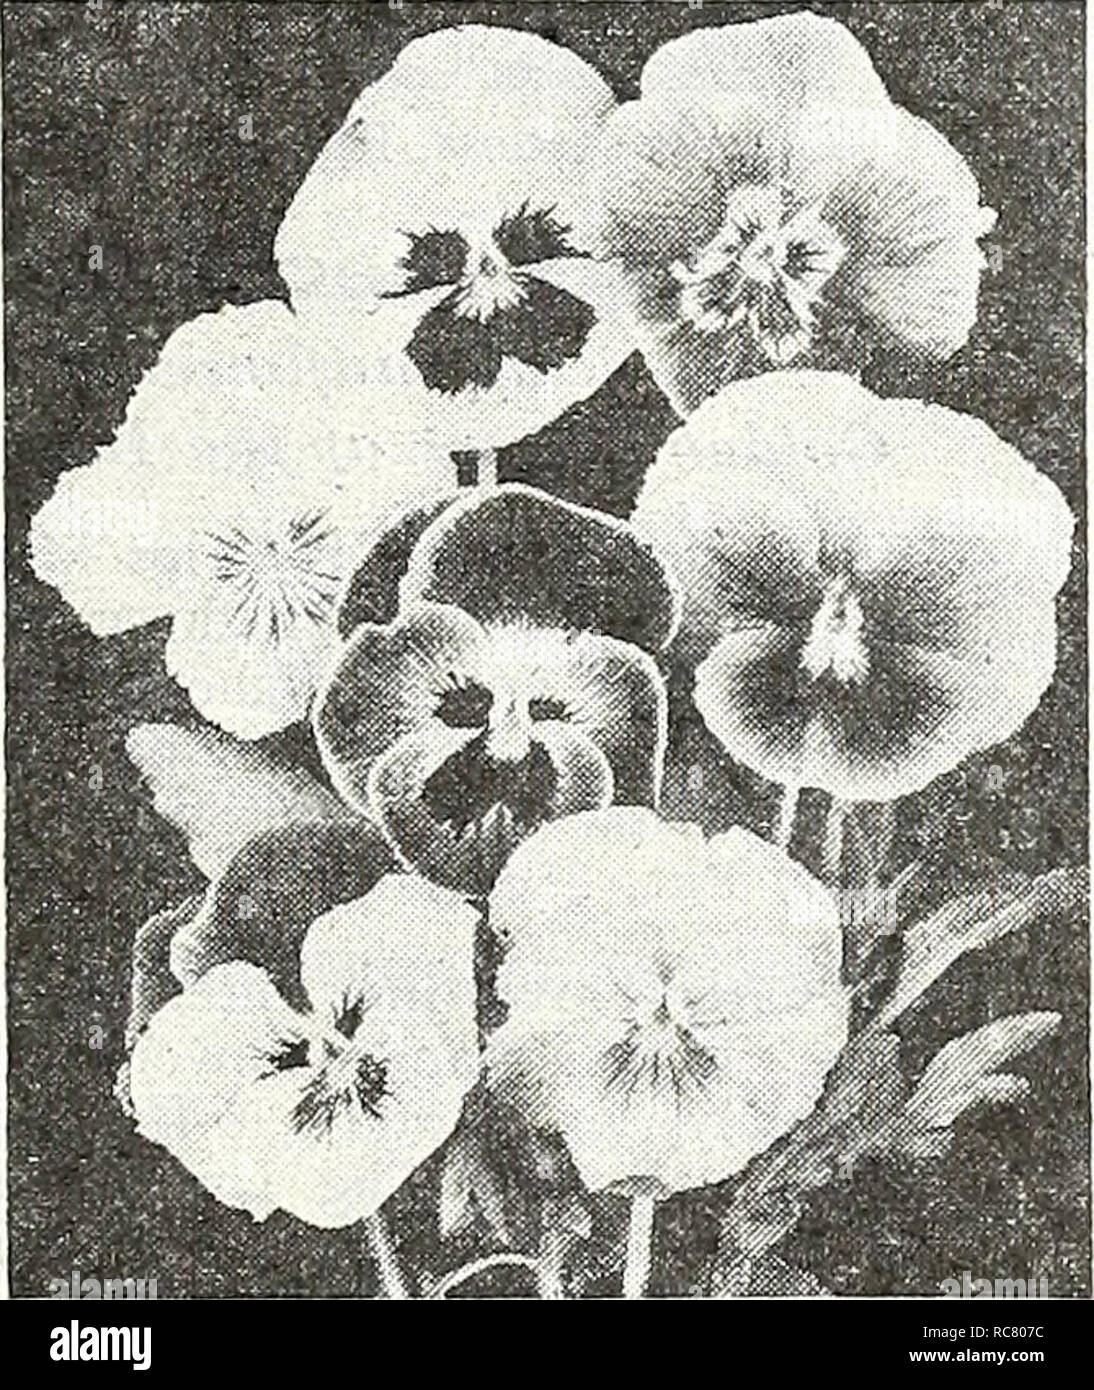 . Dreer's garden book for 1947. Seeds Catalogs; Nursery stock Catalogs; Gardening Equipment and supplies Catalogs; Flowers Seeds Catalogs; Vegetables Seeds Catalogs; Fruit Seeds Catalogs. Oenothera Missouriensis Oenothera 1^^] Evening Primrose &amp; Sundrop 3175 Missouriensis. Easy to grow and very interesting because the large bright yellow iiowers open suddenly at dusk. Somewhat pro- cumbent with the upright stems about a foot tall. Pkt. ISc; large pkt. SOc. 3176 Youngi. A Blooms during the daytime carrying bright golden yel- low blooms on plants 2 ft. tall. Strong and vigorous. An extremely Stock Photo